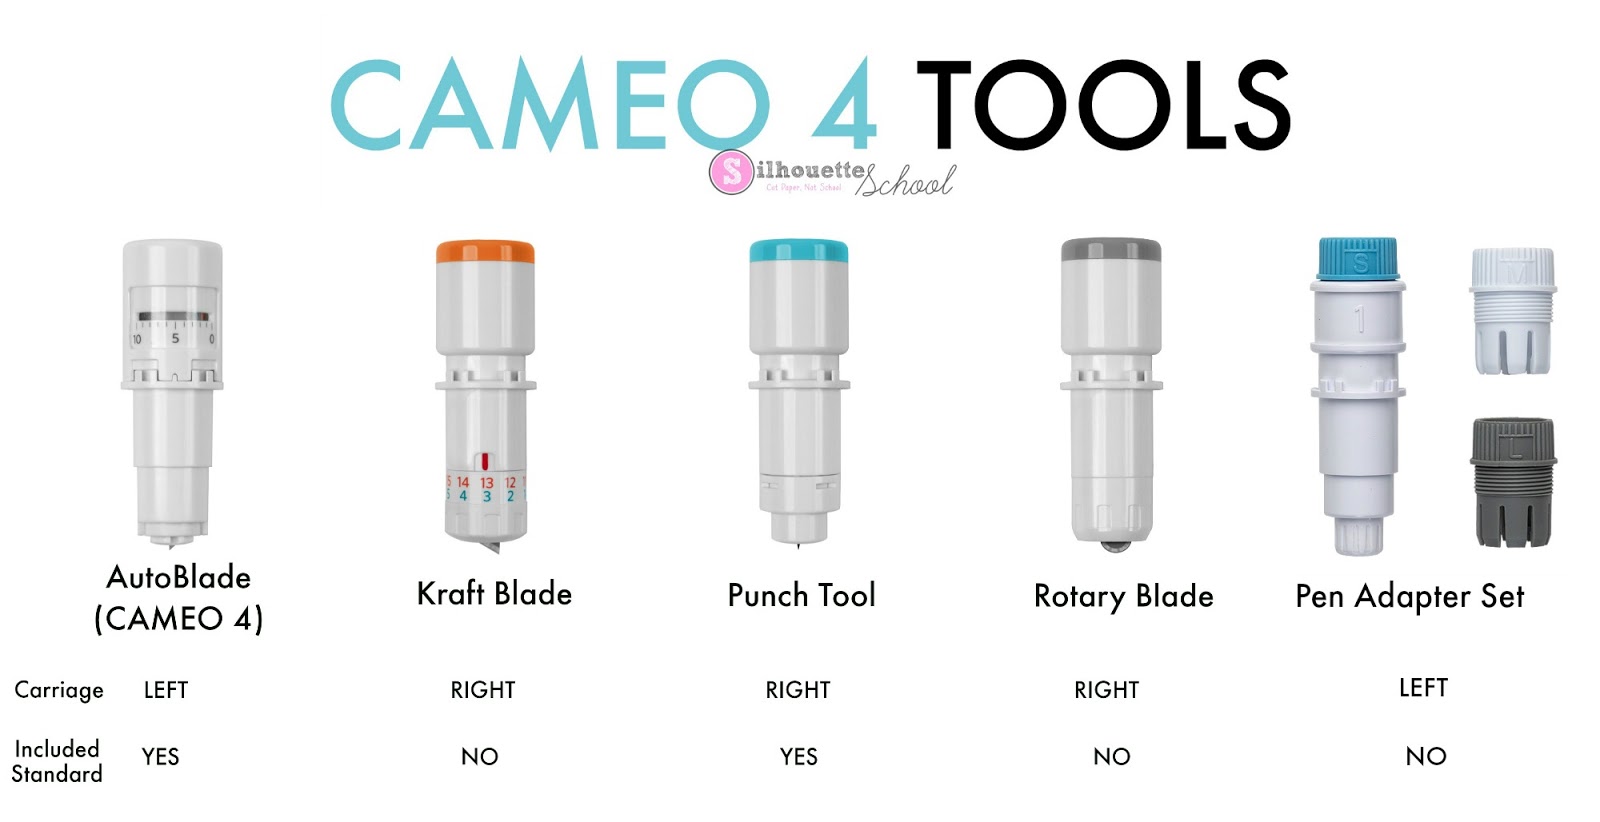 New Silhouette CAMEO 4 Blades (First Look) - Silhouette School